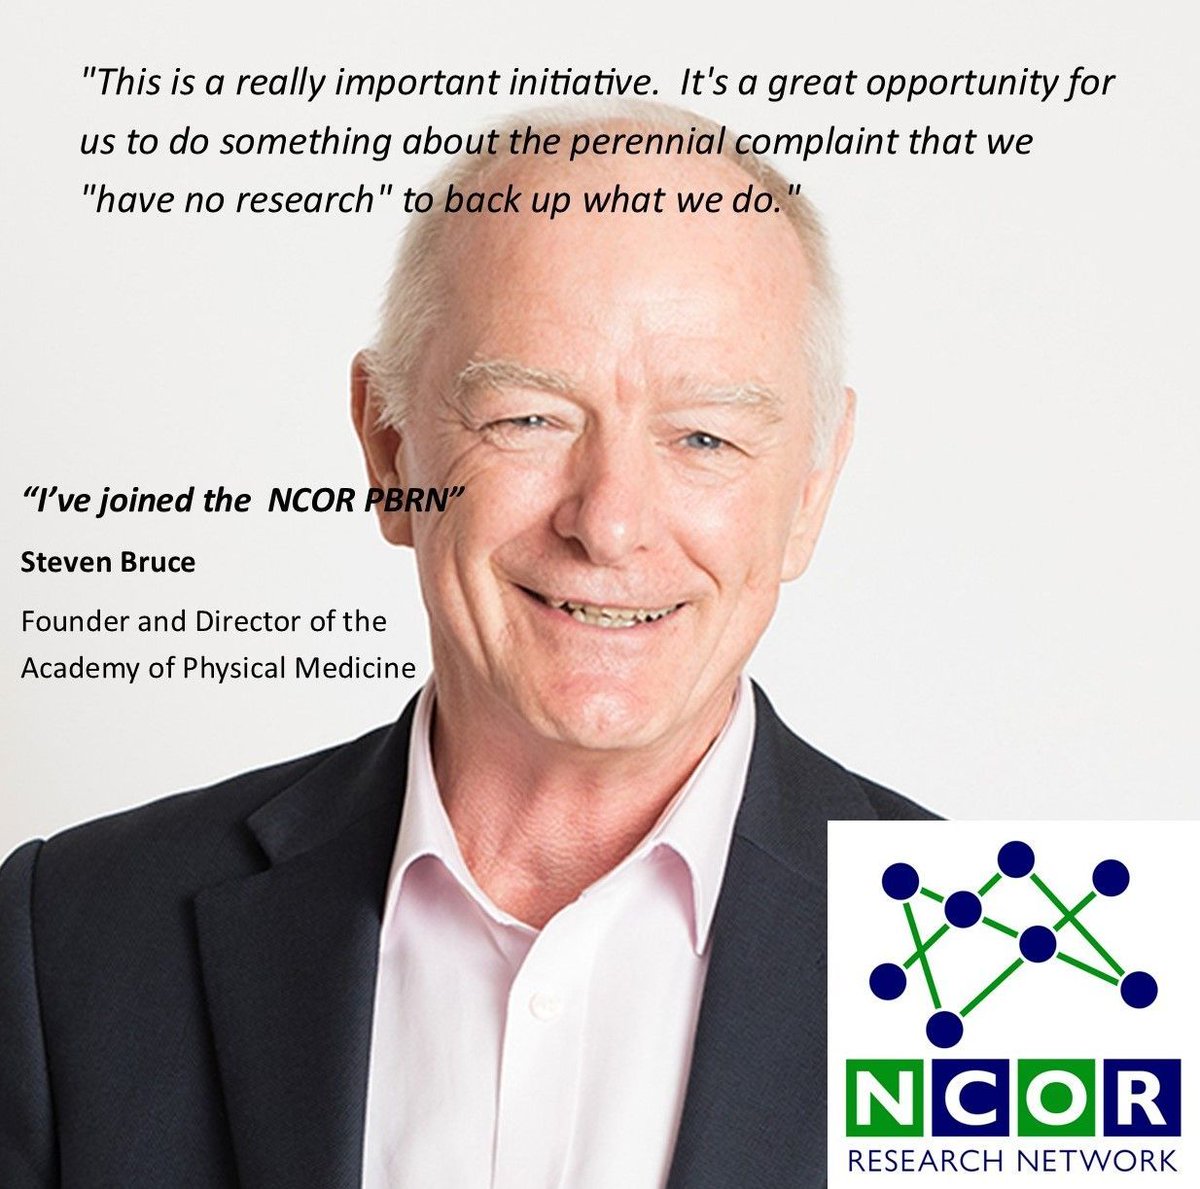 🌐 Join the NCOR Research Network, the UK's first osteopathy Practice Based Research Network. Complete the survey by May 21 for a chance to win a £100 Amazon voucher! 🔗 buff.ly/49t4TcE #NCORUK #NCOR_RN #PBRN #osteopathy #research #OsteopathsUK #OsteopathicResearch